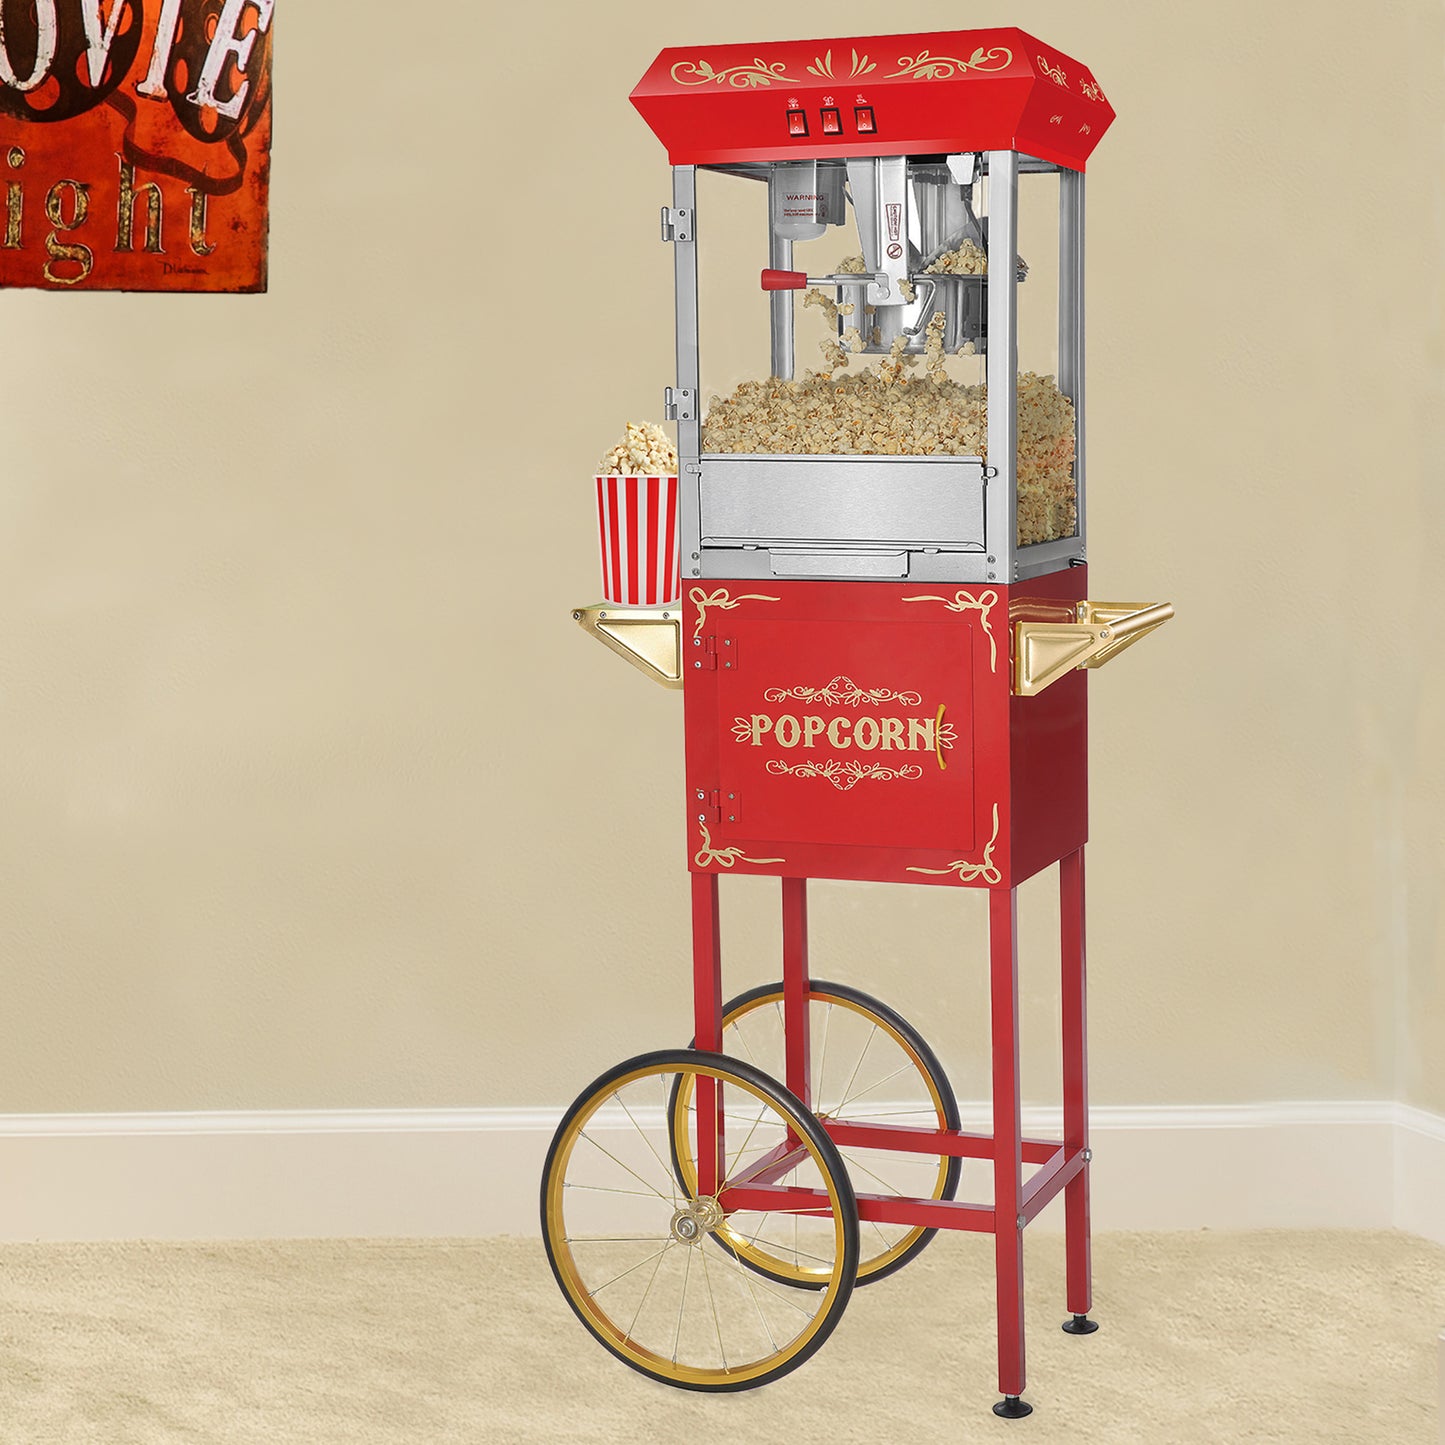 Foundation Popcorn Machine with Cart, 8 Ounce Kettle and 5 All-In-One Popcorn Packs -Red